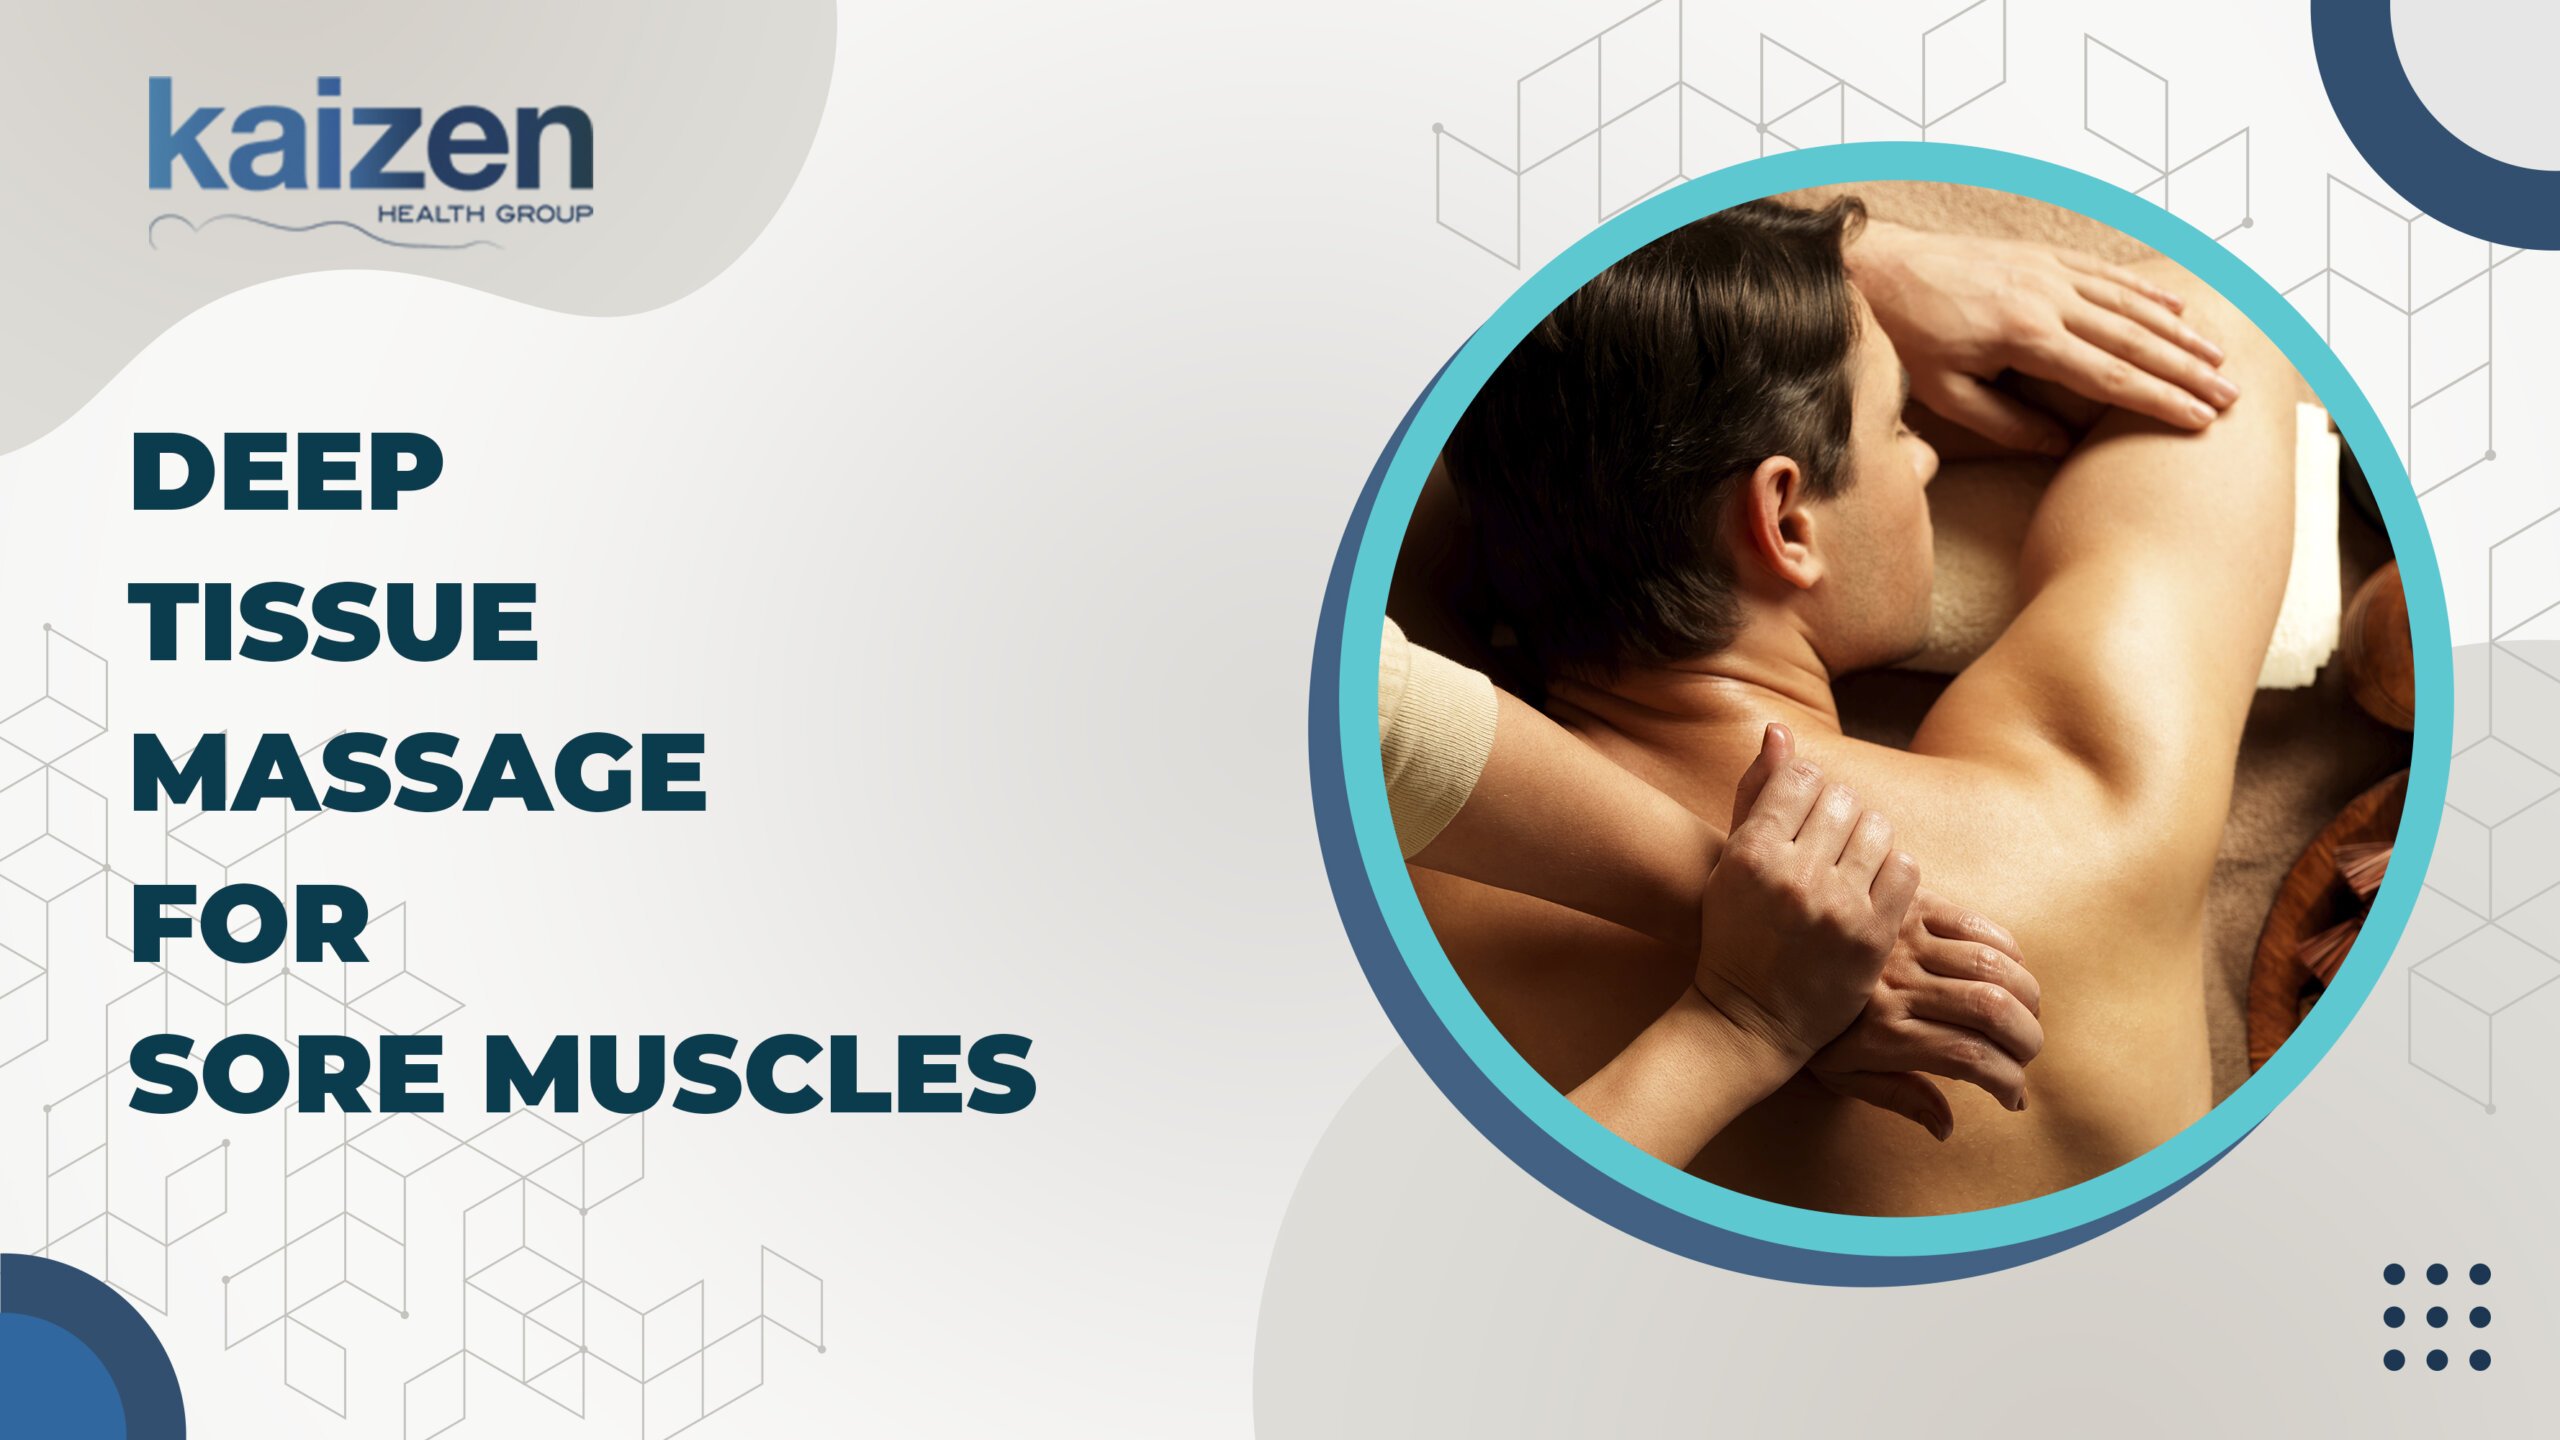 Deep tissue massage for sore muscles